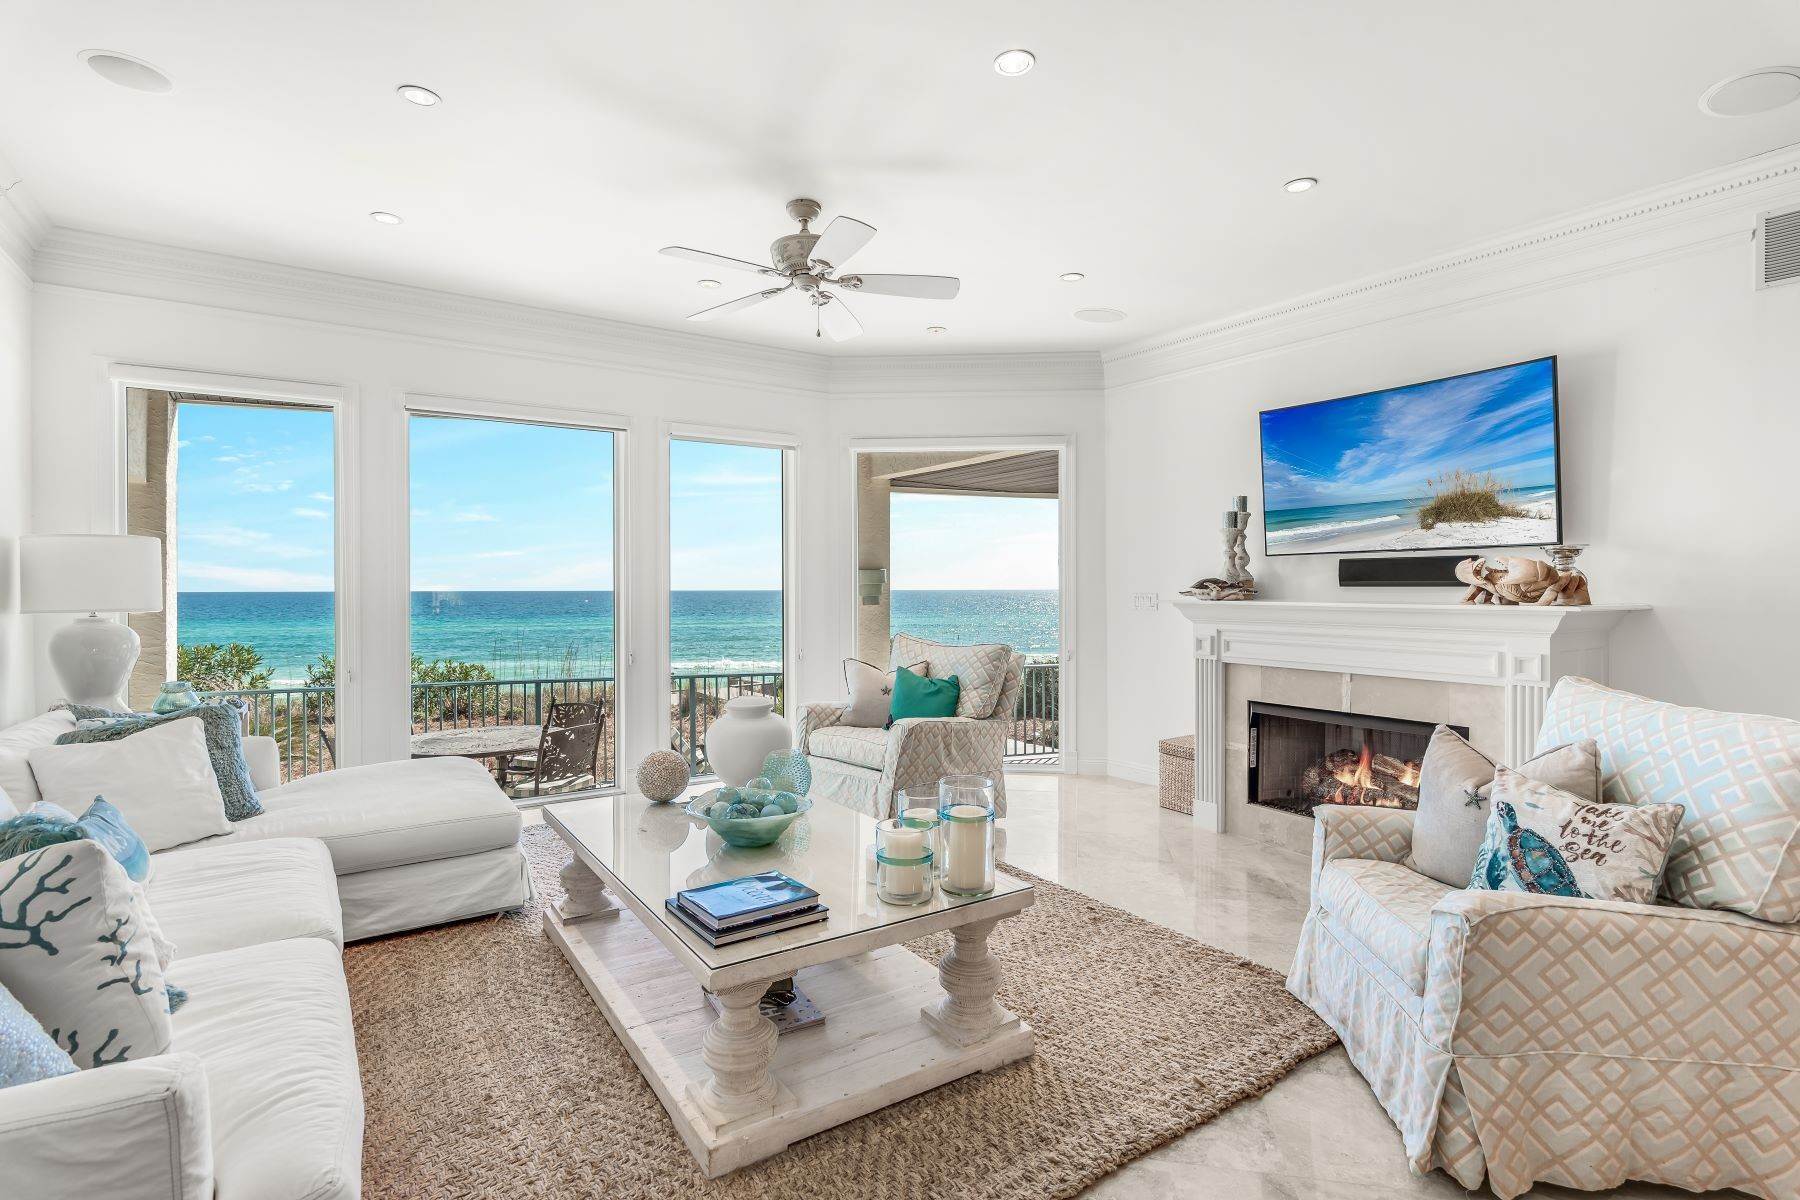 Single Family Homes for Sale at Beachfront Estate With Forever Gulf Views & Private Boardwalk 12 White Cliffs Crest Santa Rosa Beach, Florida 32459 United States